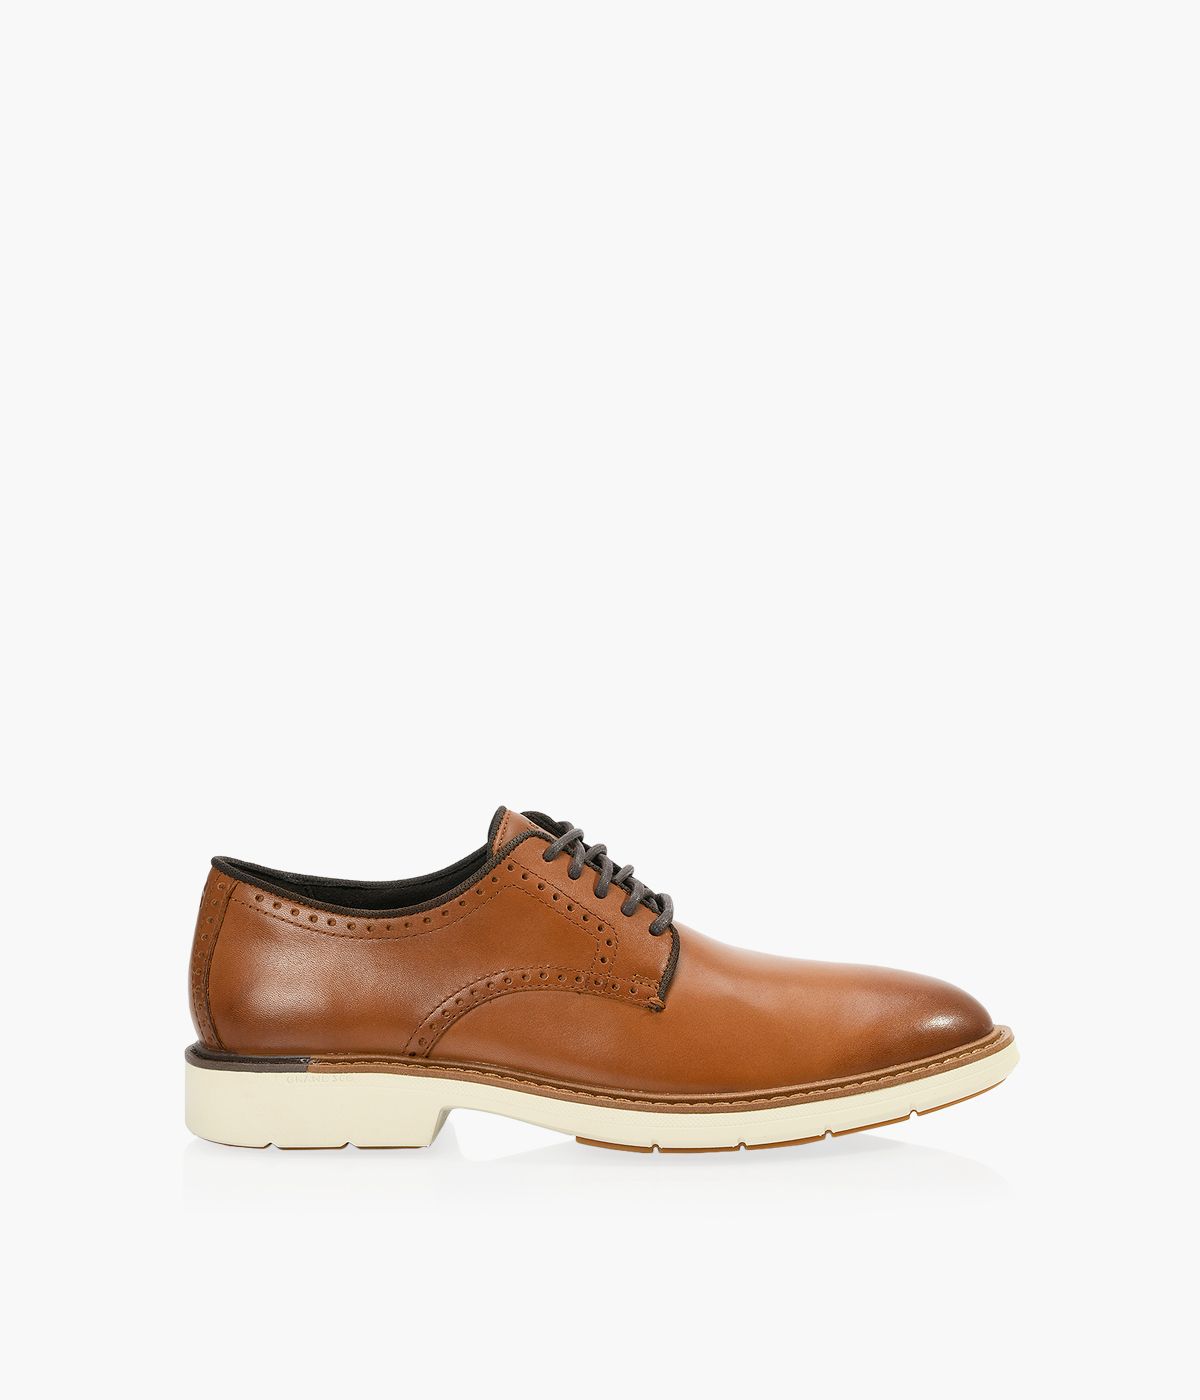 COLE HAAN GO TO PLAIN OXFORD - Tan Leather | Browns Shoes